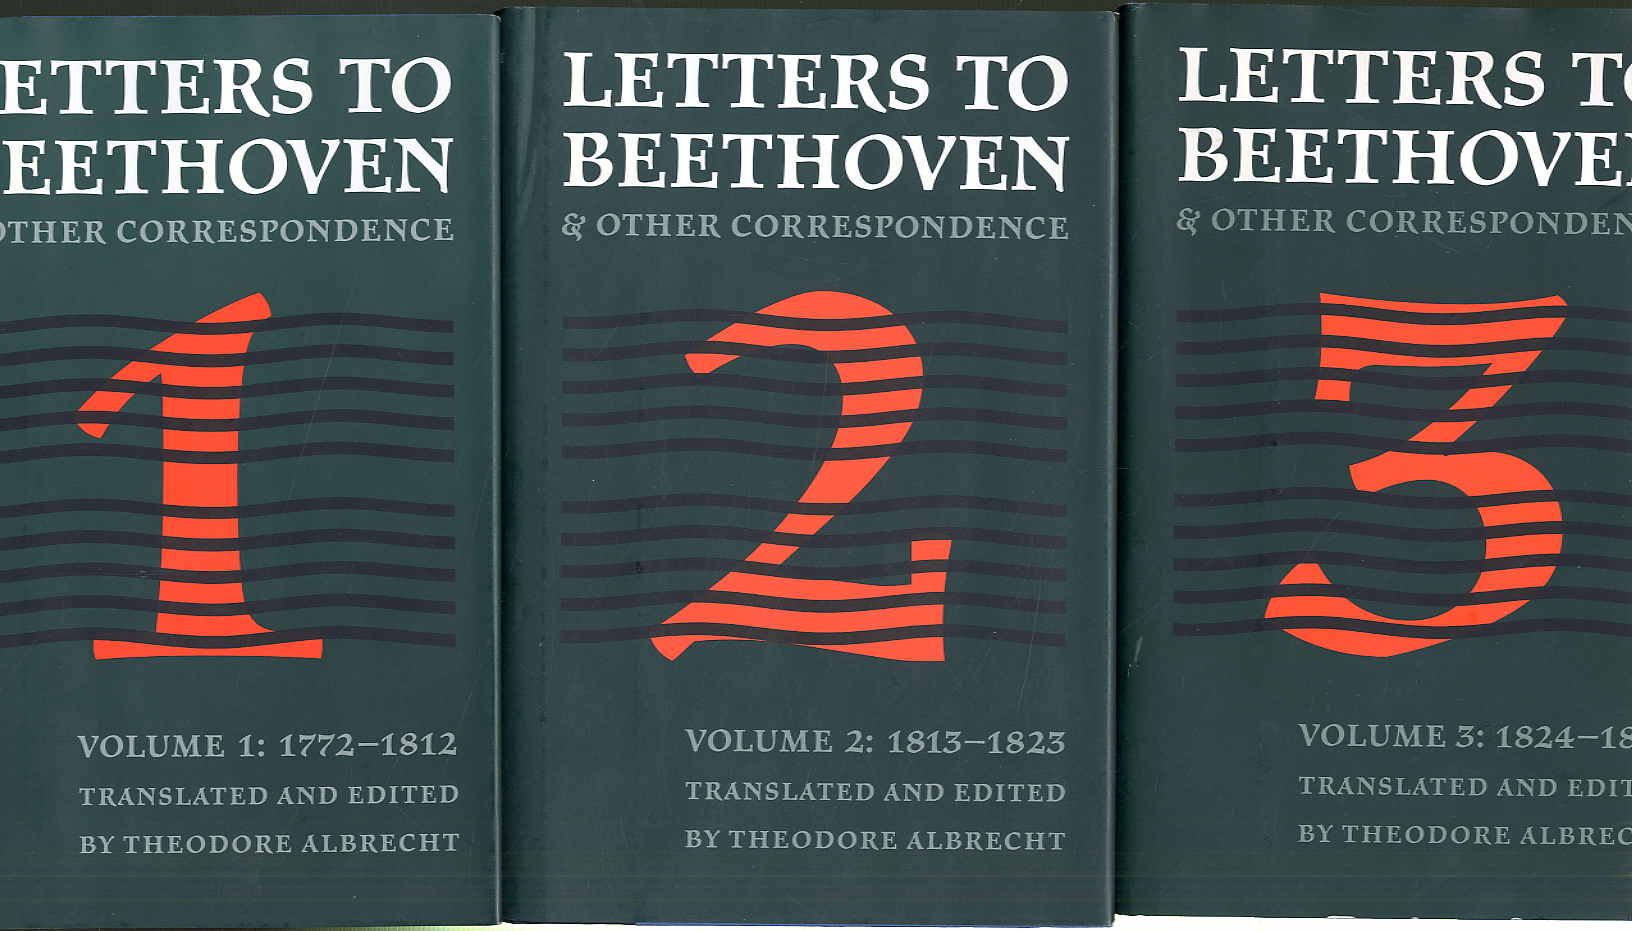 Letters to Beethoven and other correspondence. Translated and edited by Theodore Albrecht. Volume 1: 1772-1812; Volume 2: 1813-1823; Volume 3: 1824-1828. - Beethoven - Albrecht, Theodore